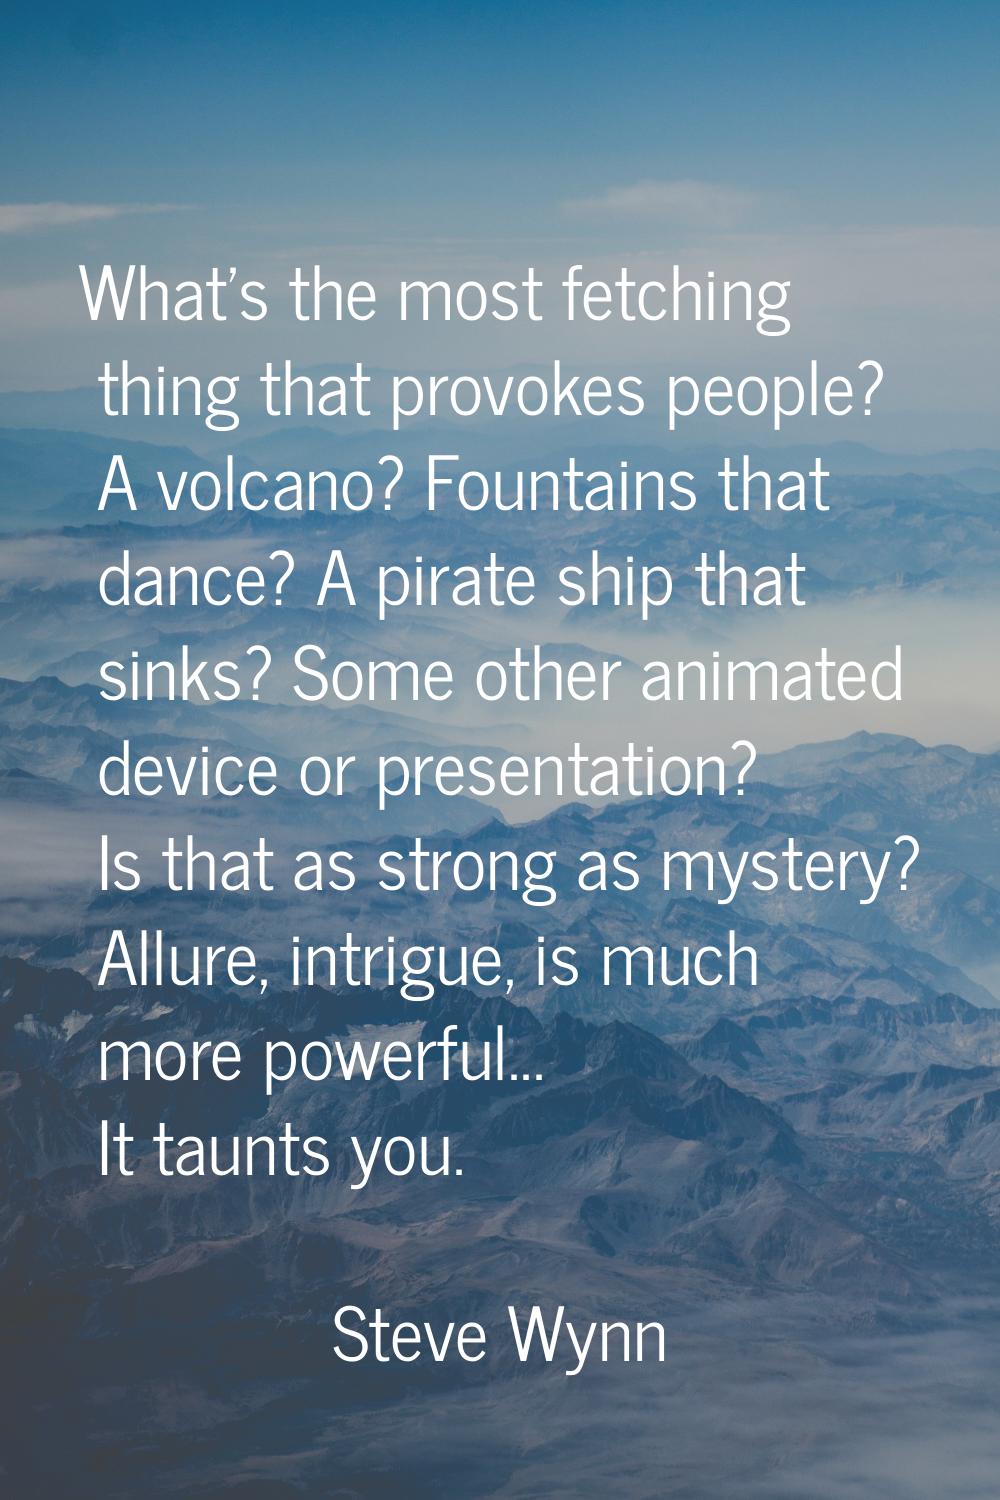 What's the most fetching thing that provokes people? A volcano? Fountains that dance? A pirate ship